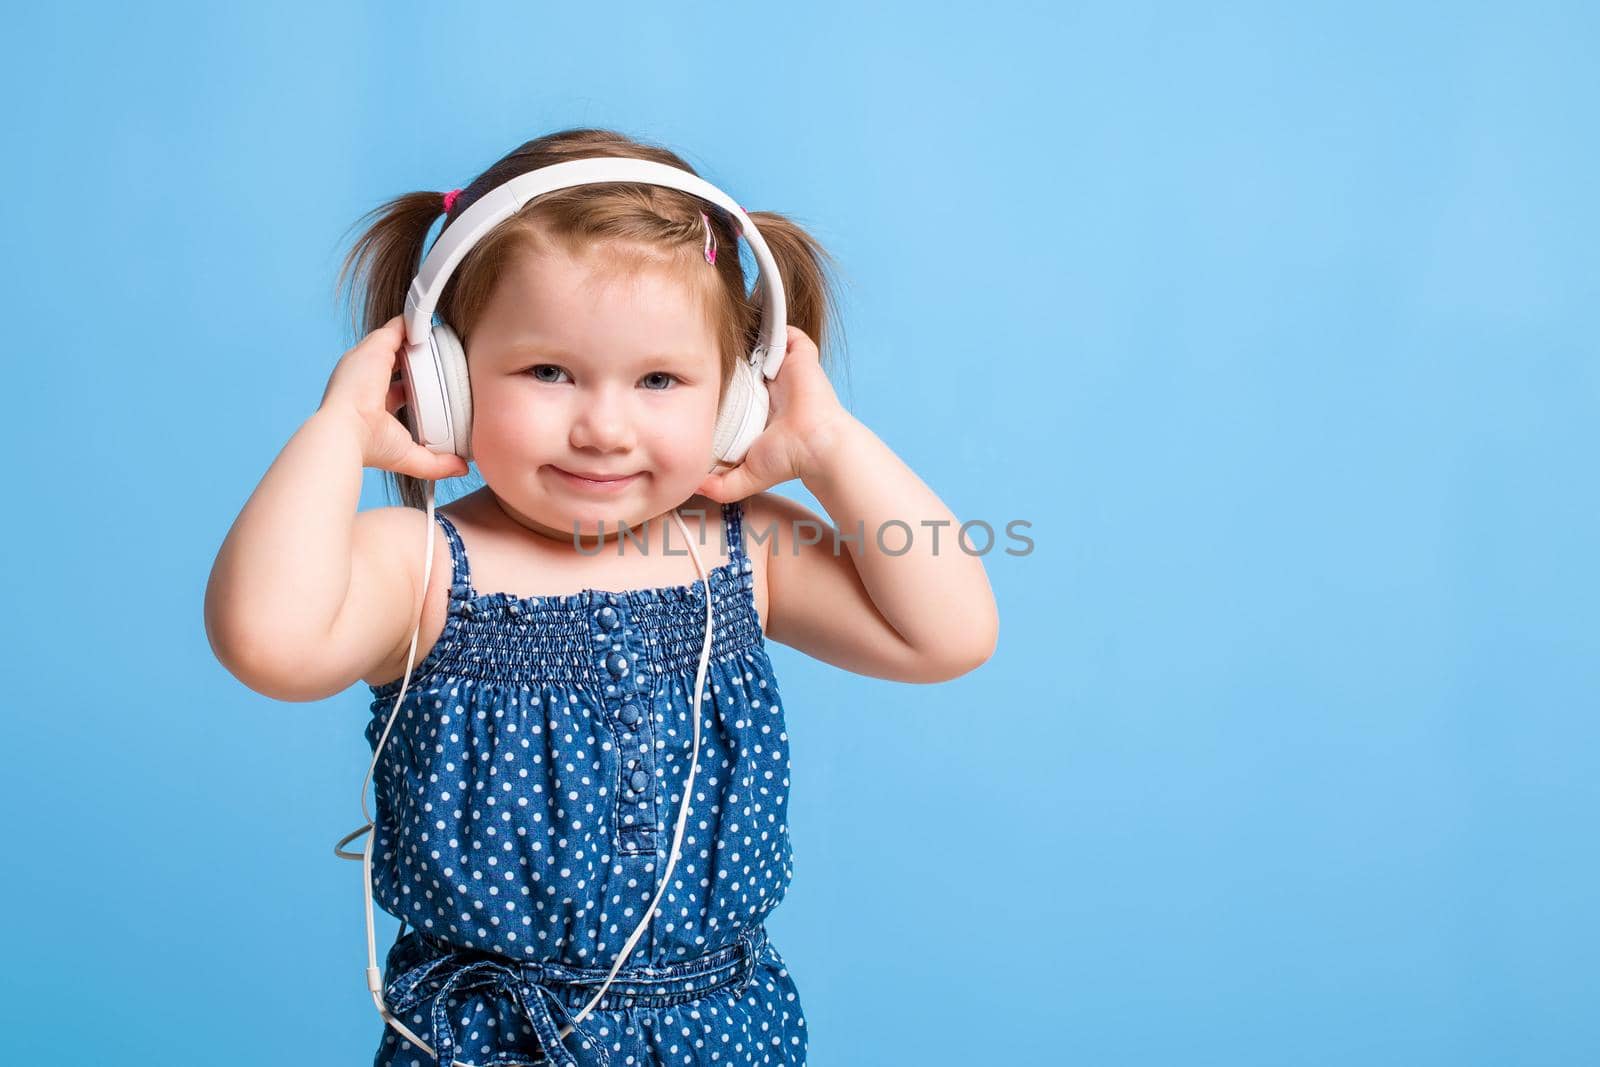 Cute little girl in headphones listening to music using a tablet and smiling on blue background. A child looks at the camera